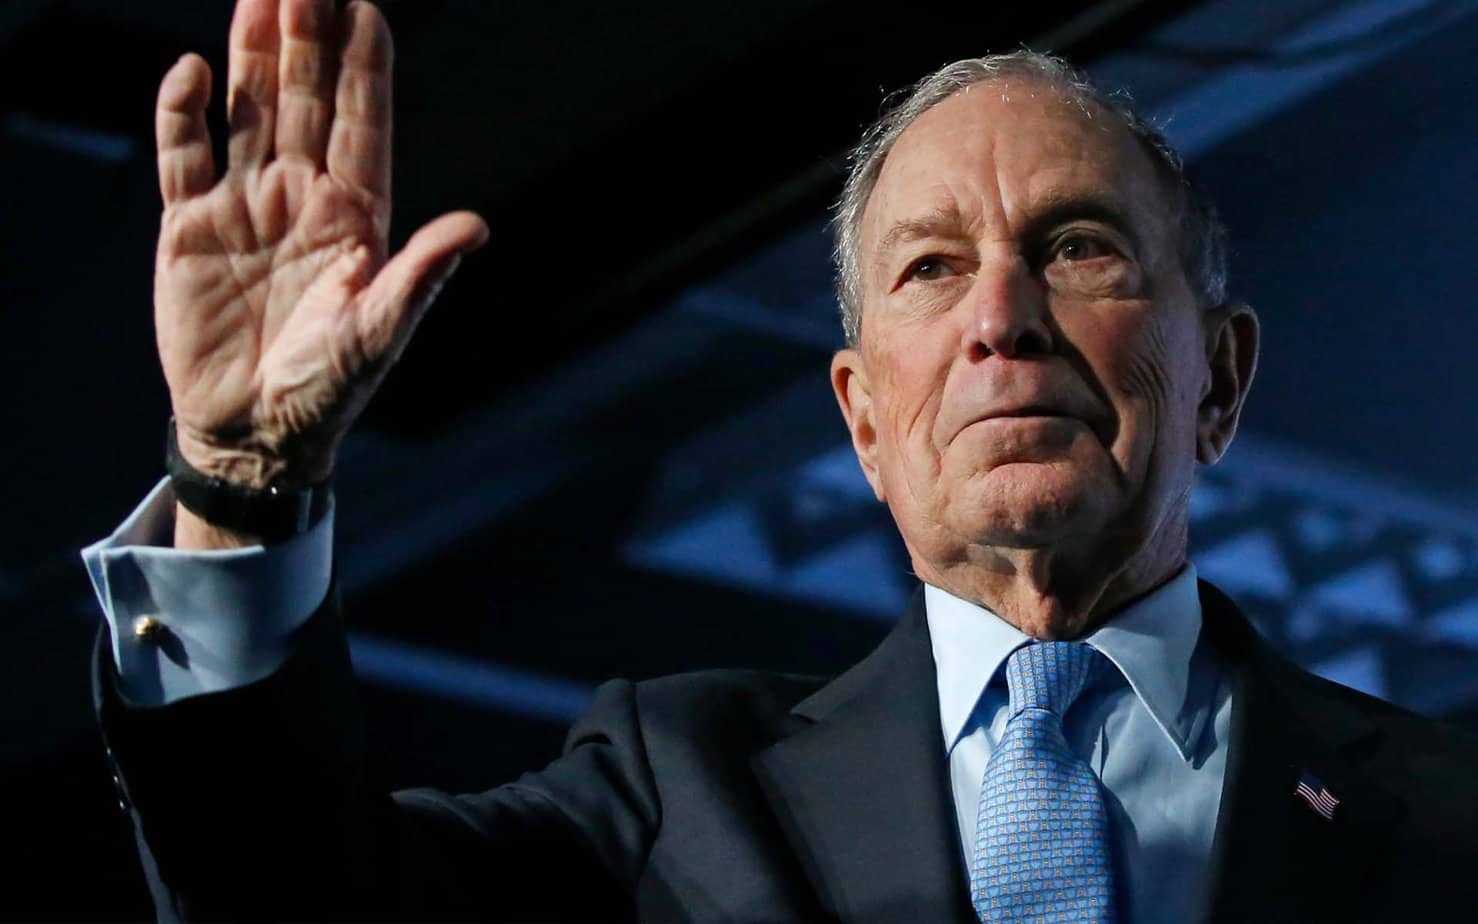 Bloomberg has dropped out of the Presidential Race